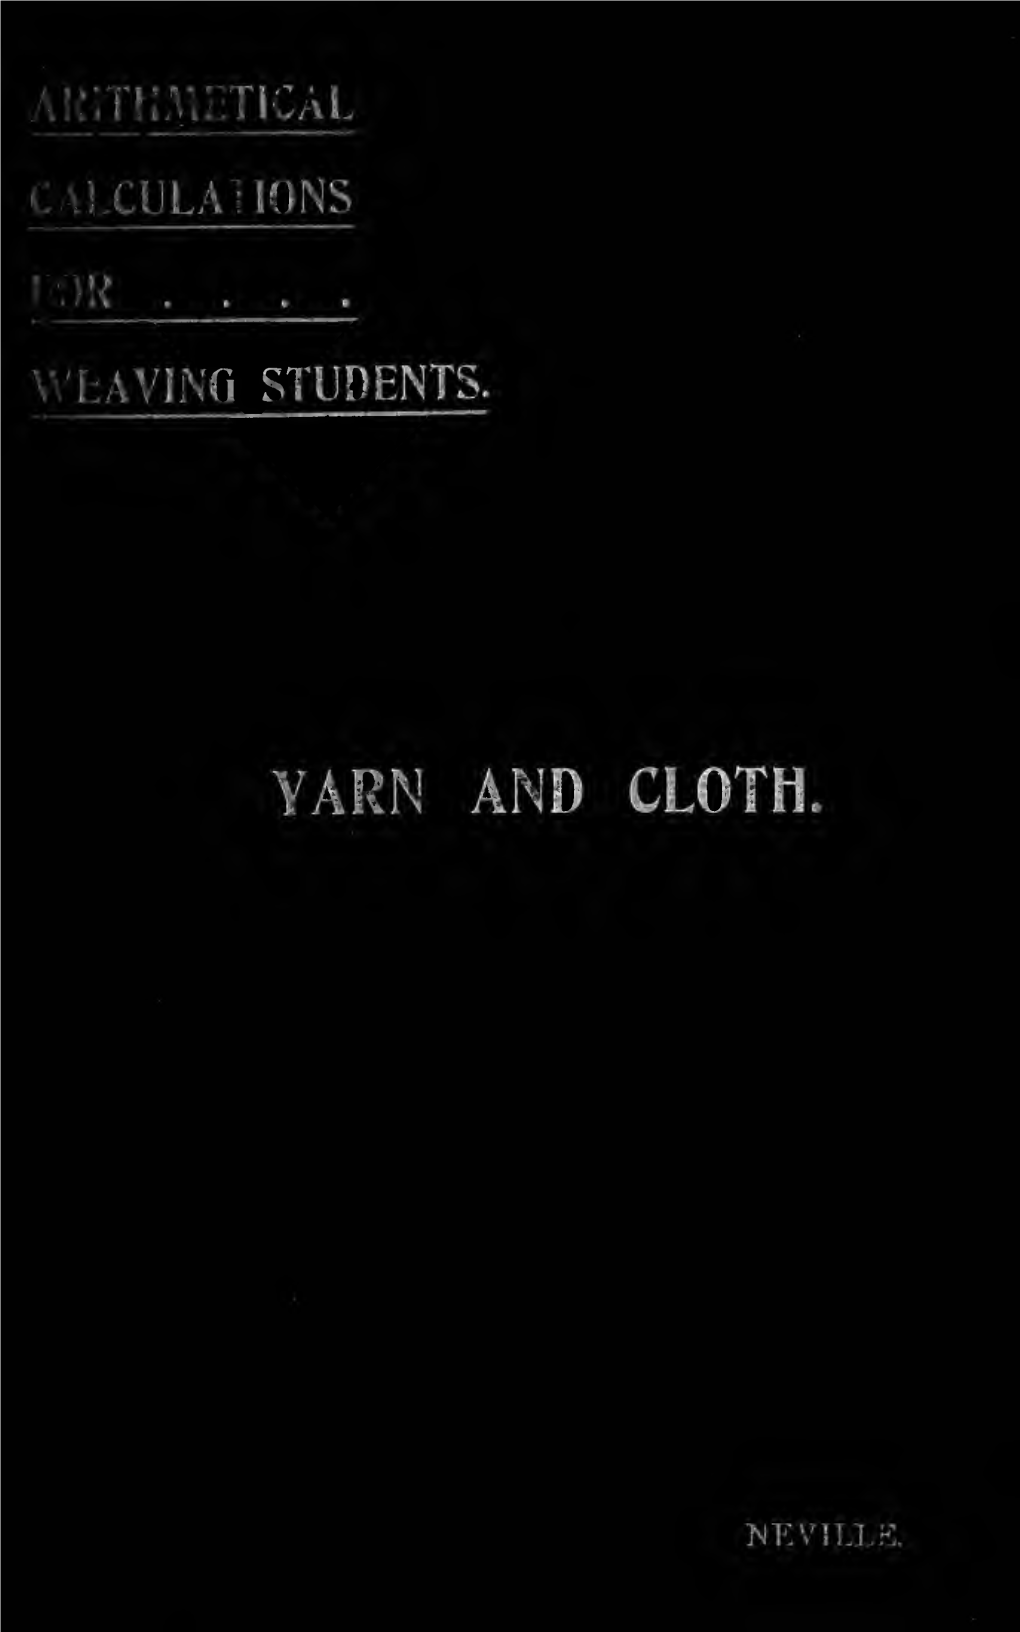 Arithmetical Calculations for Weaving Students